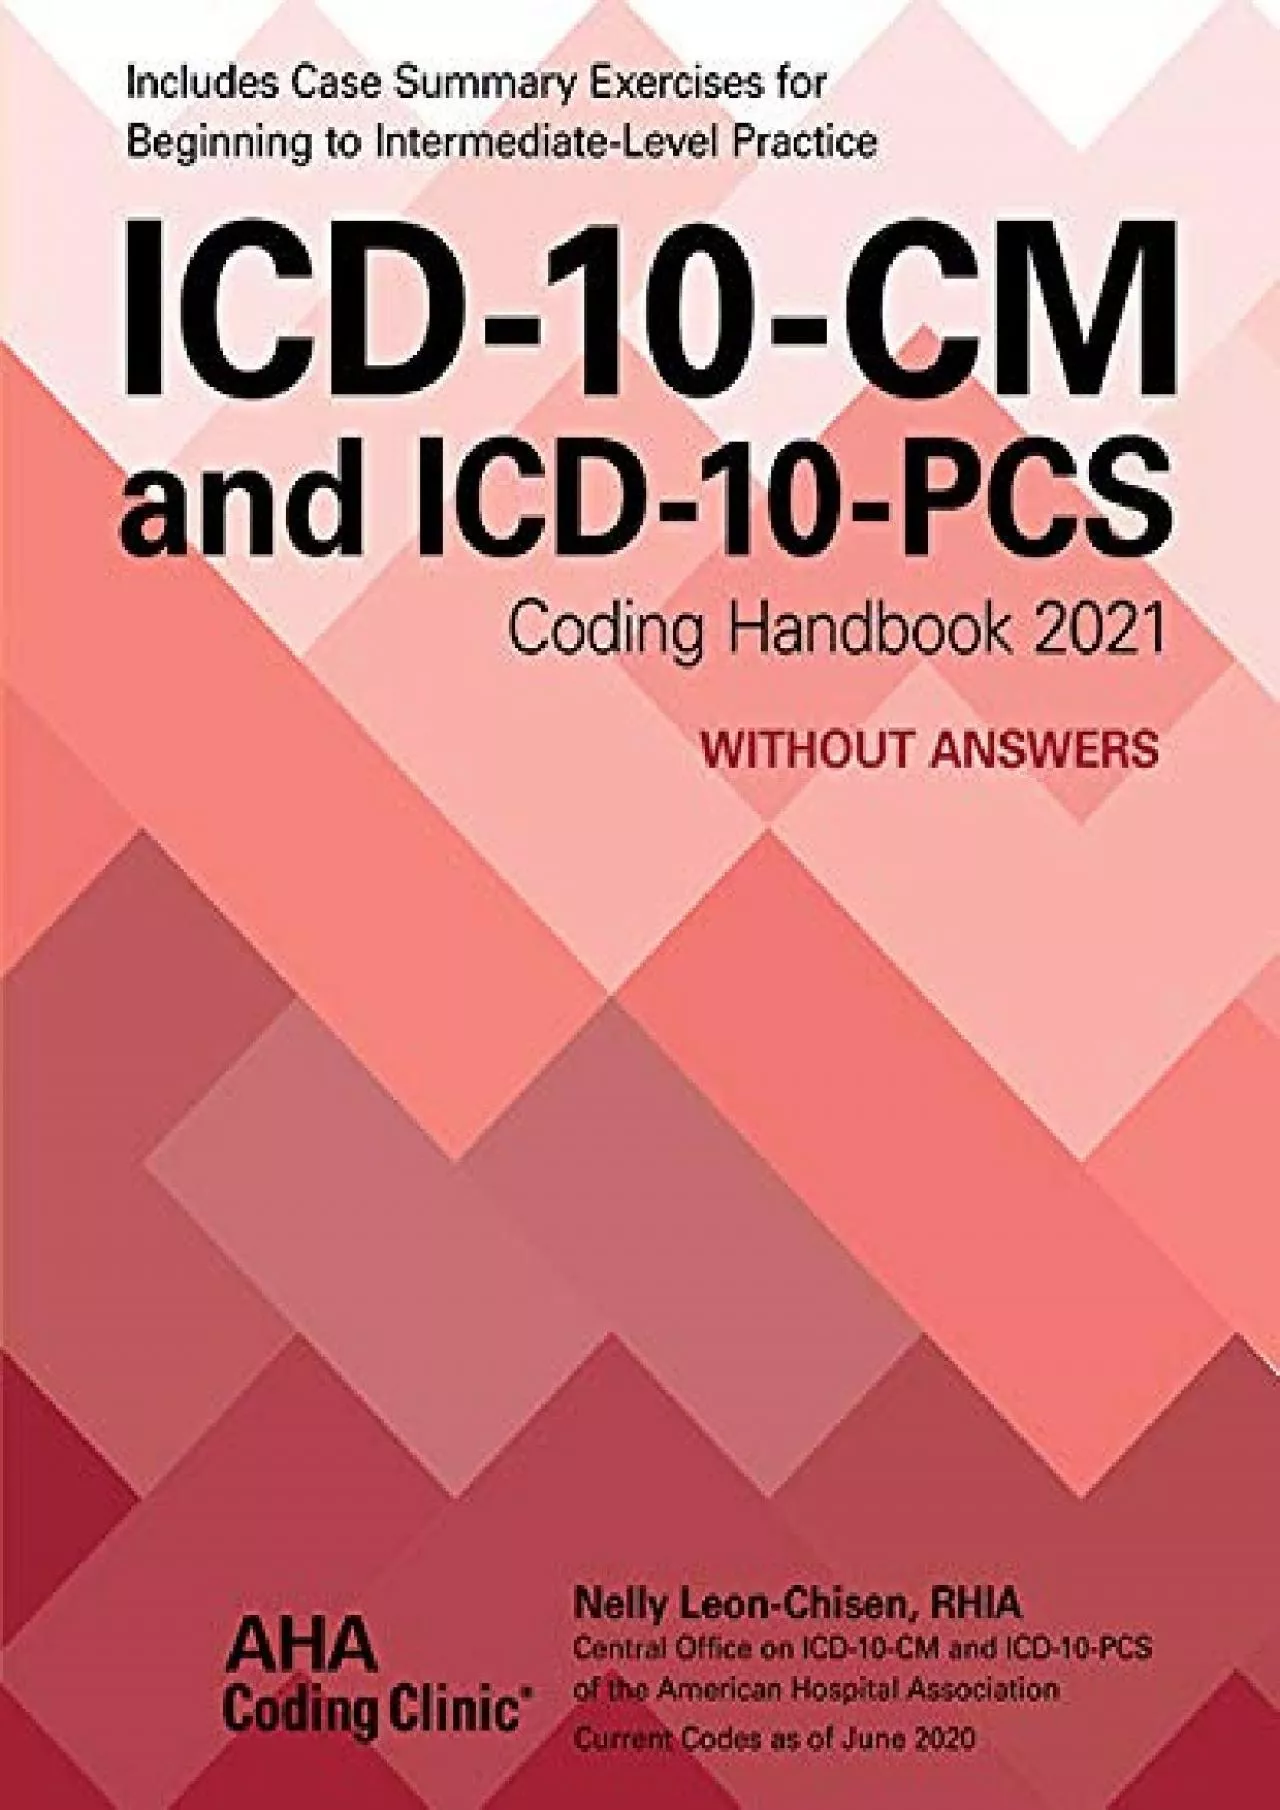 (EBOOK)-ICD-10-CM and ICD-10-PCS Coding Handbook without Answers 2021